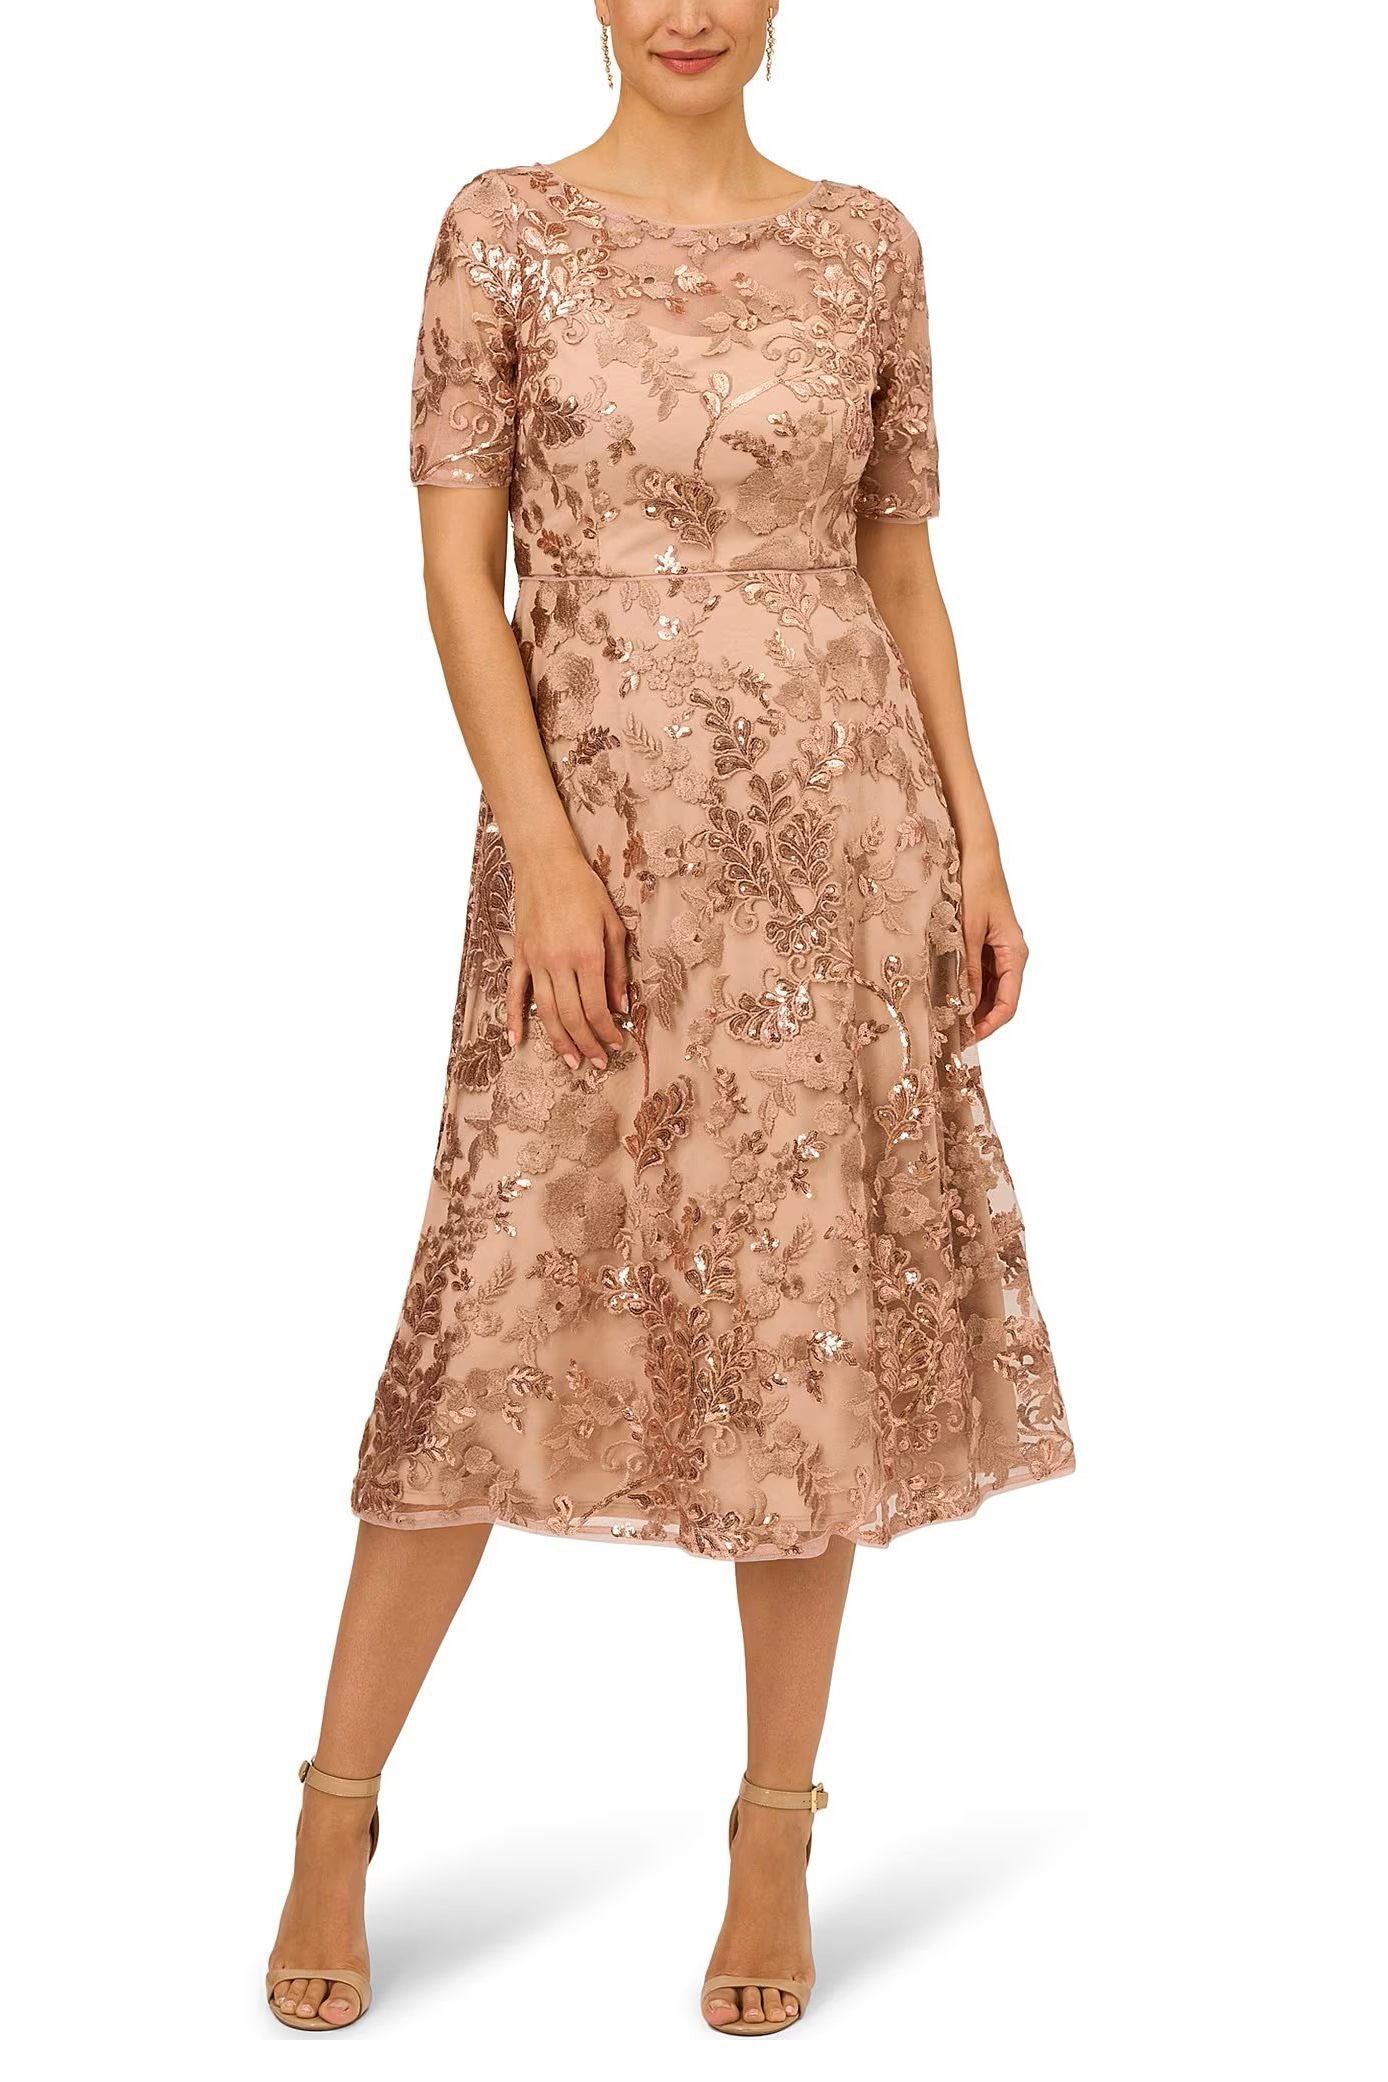 Adrianna Papell Embroidered Mesh Dress